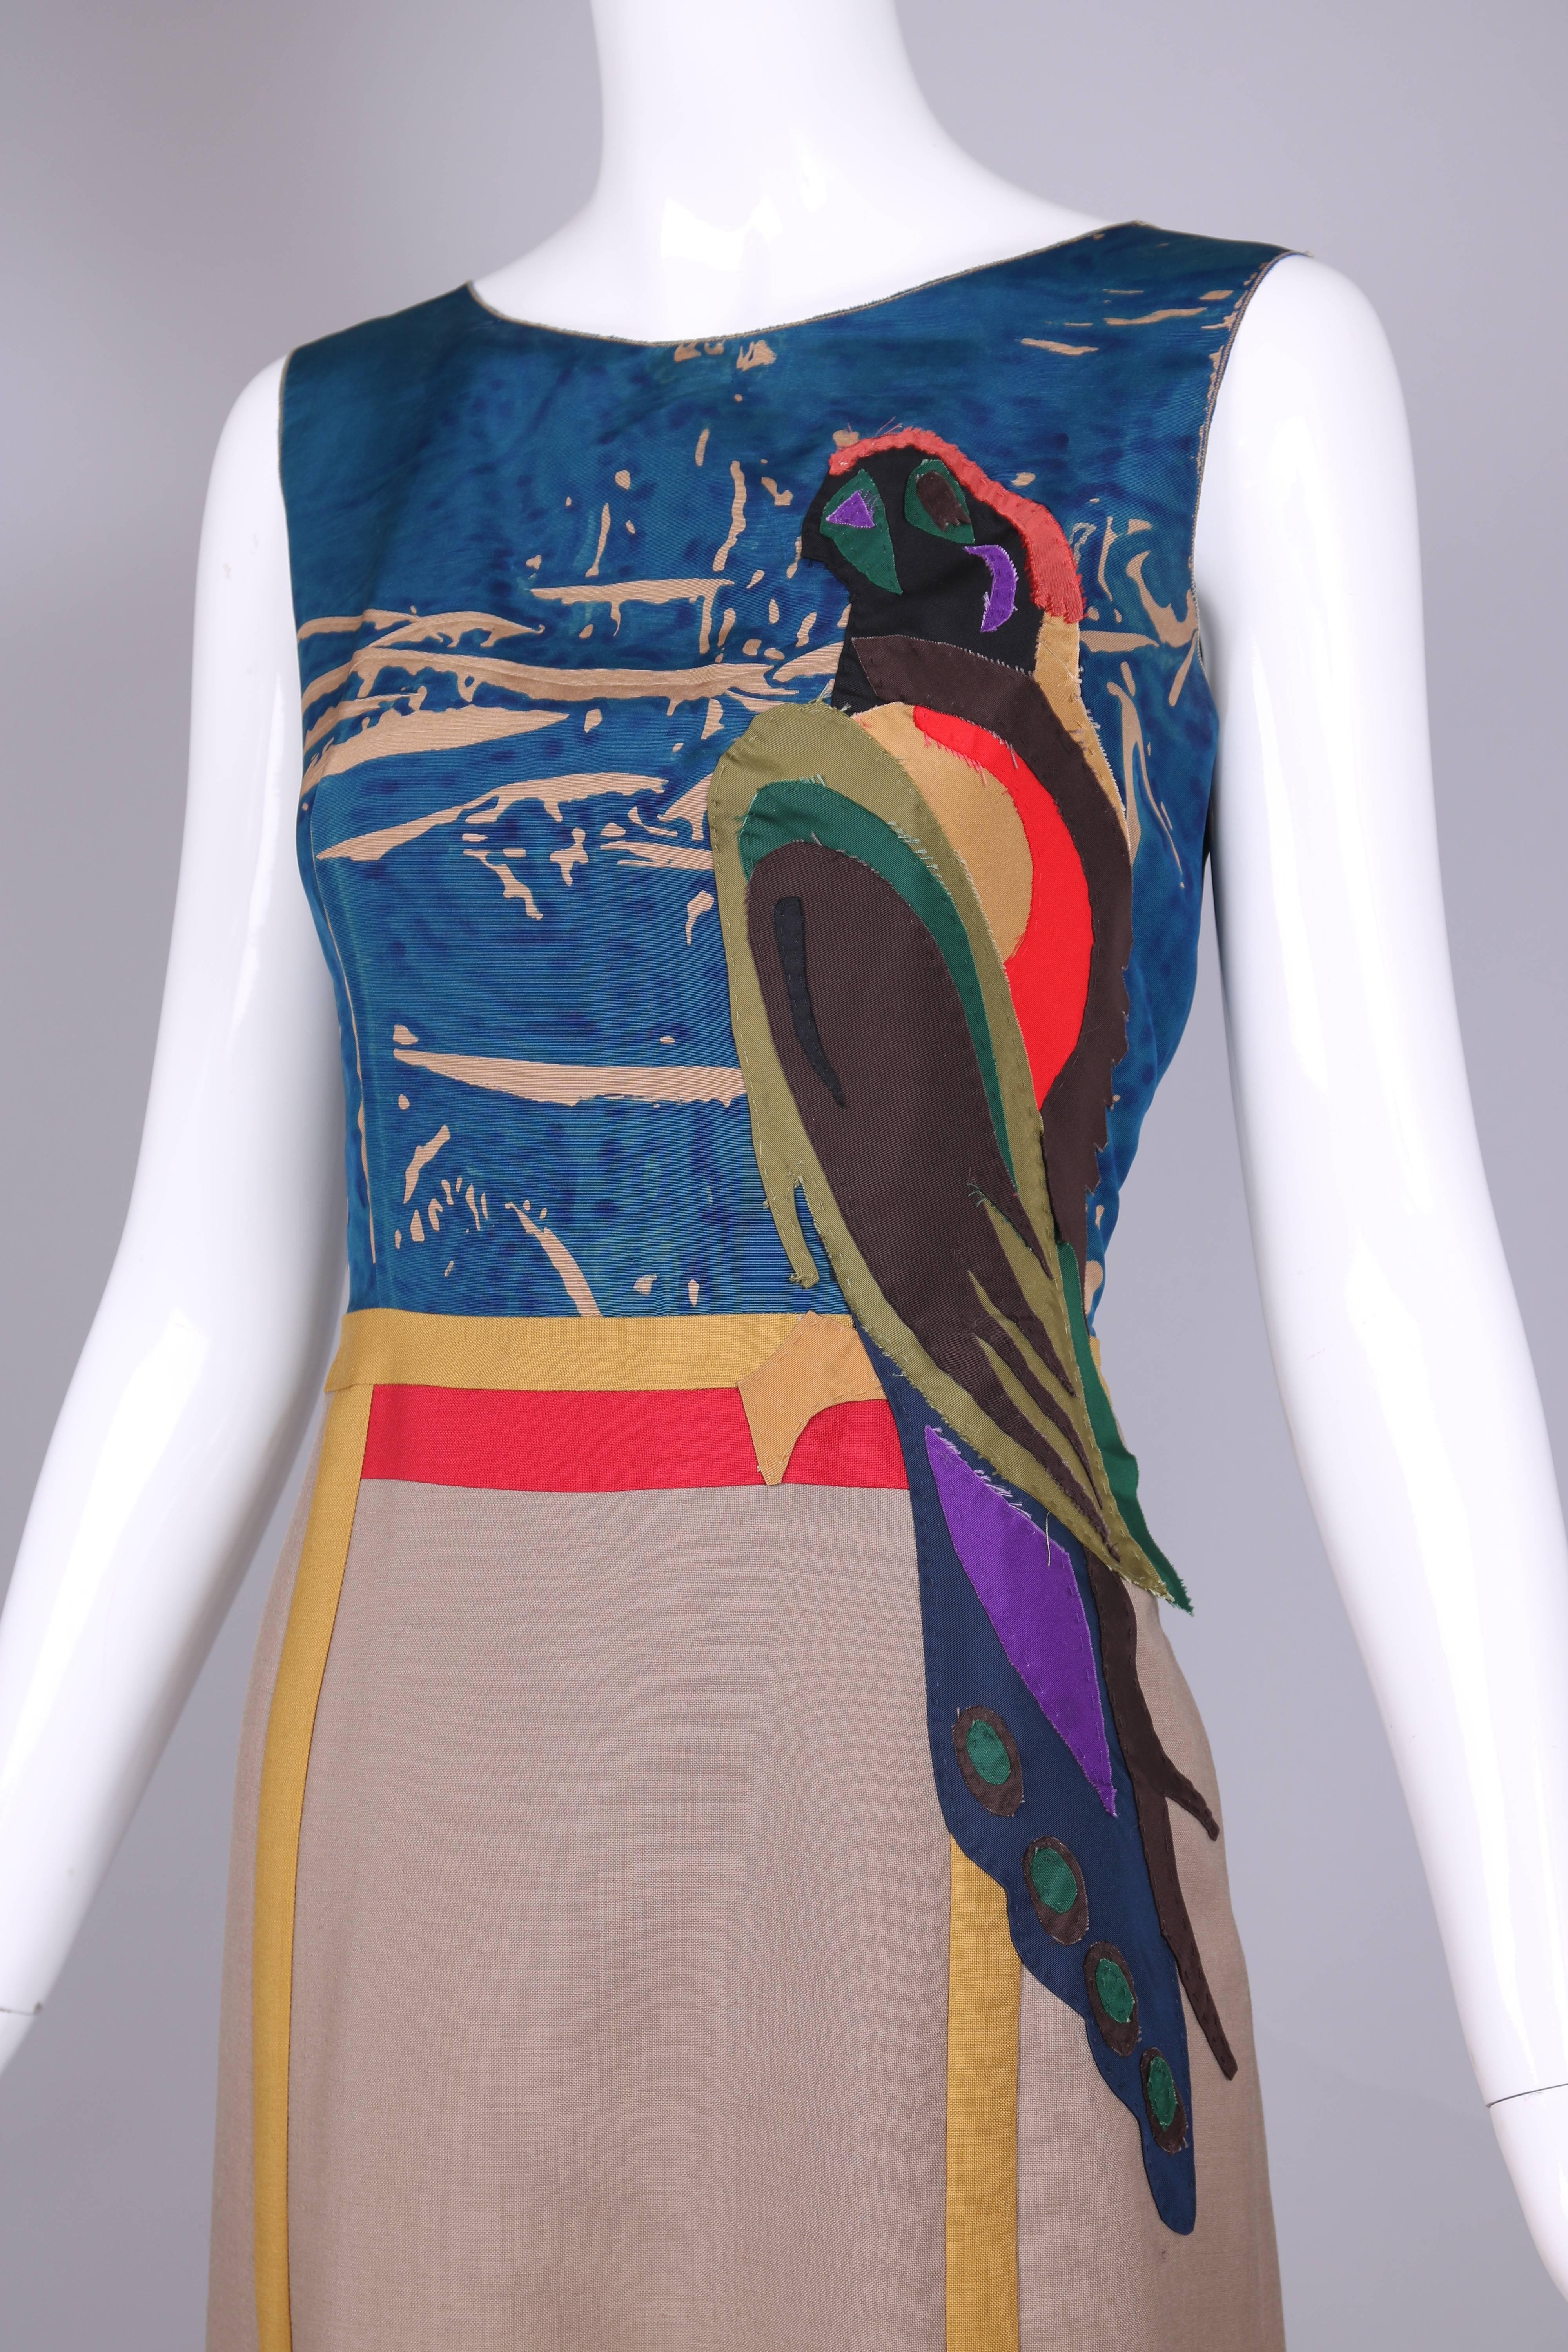 2005 Prada Sleeveless Day Dress W/Appliqued Parrot Motif In Excellent Condition In Studio City, CA